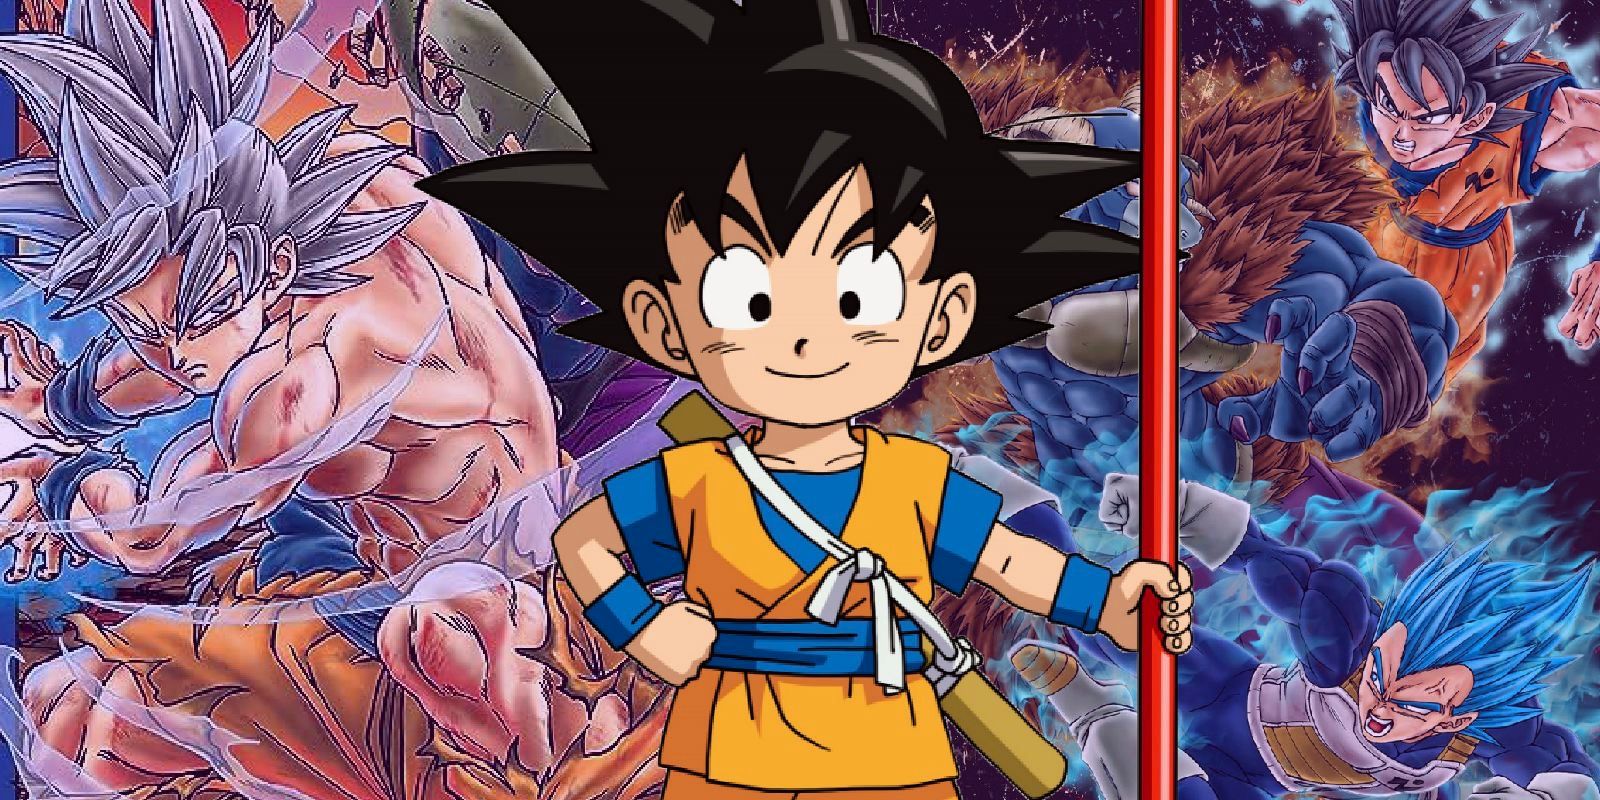 Dragon Ball Daima releases teaser trailer with potential release dates -  Spiel Anime